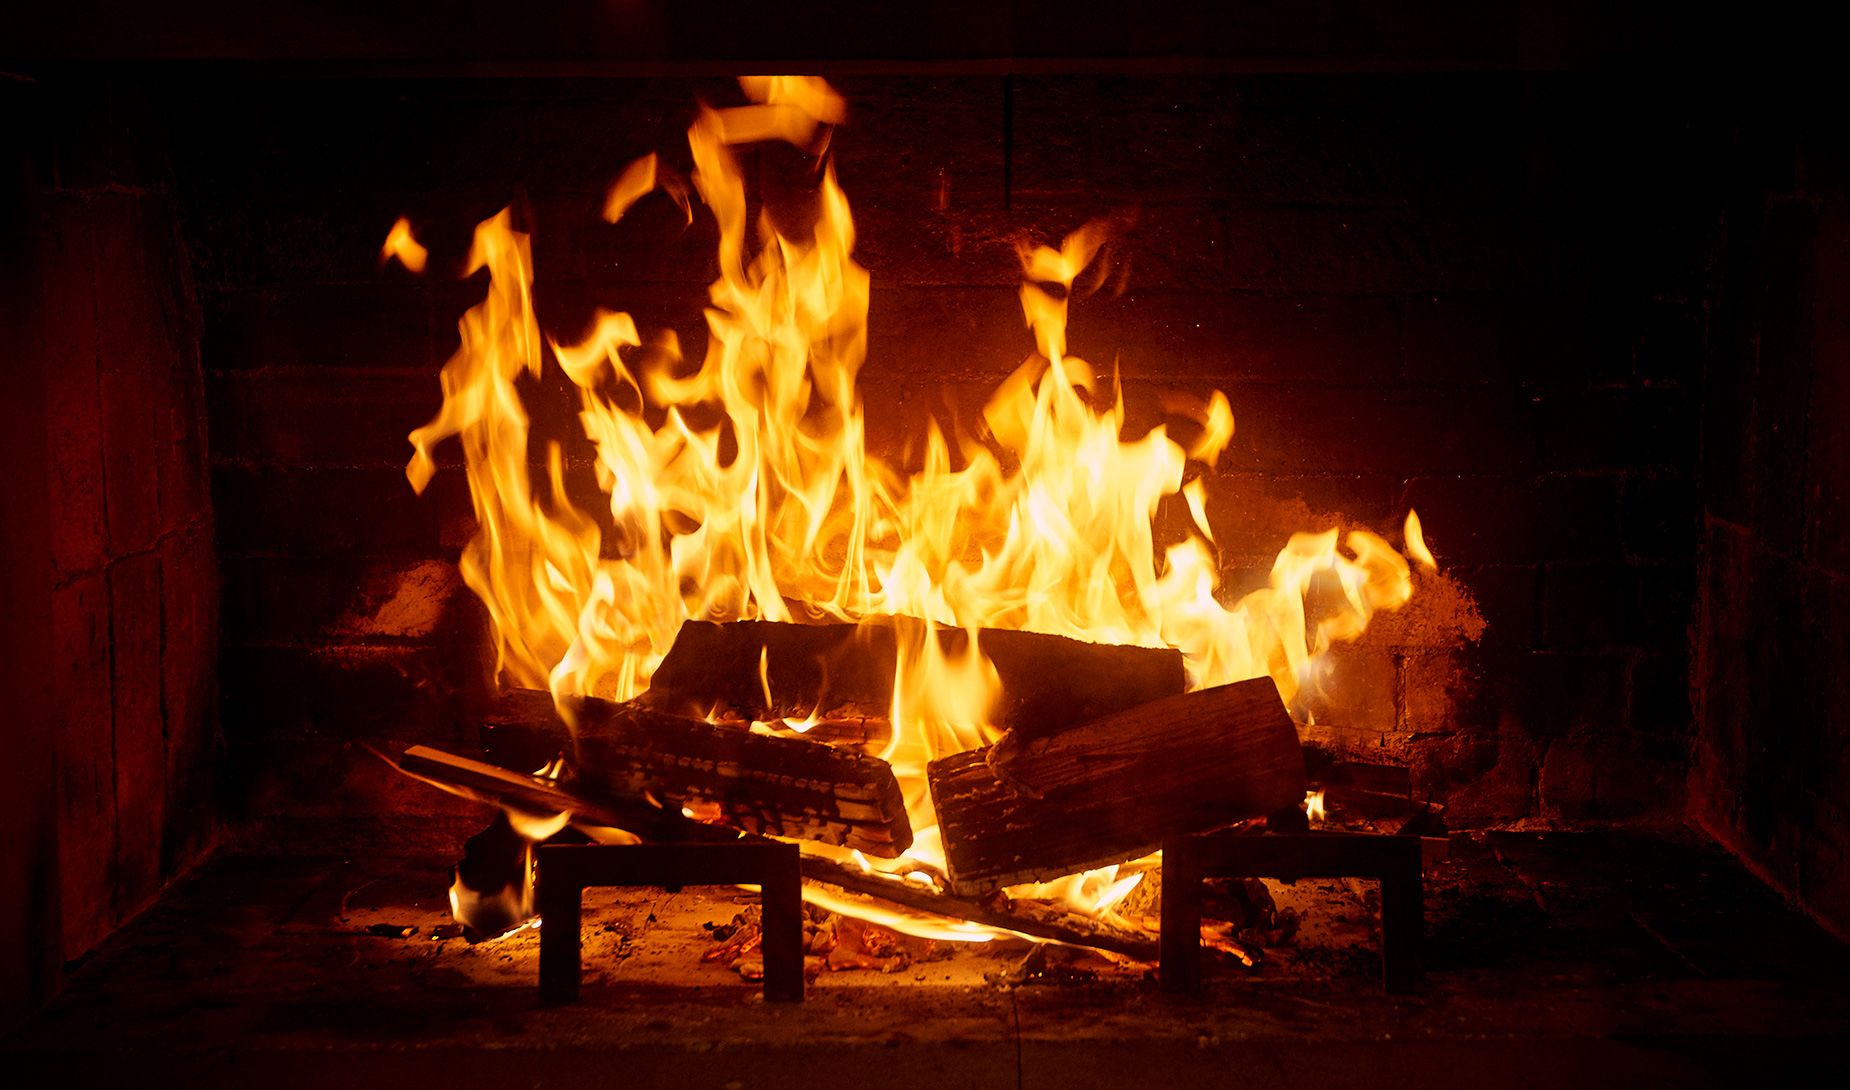 The smell of a log fire is a particular favorite for home fragrance around the holiday season.